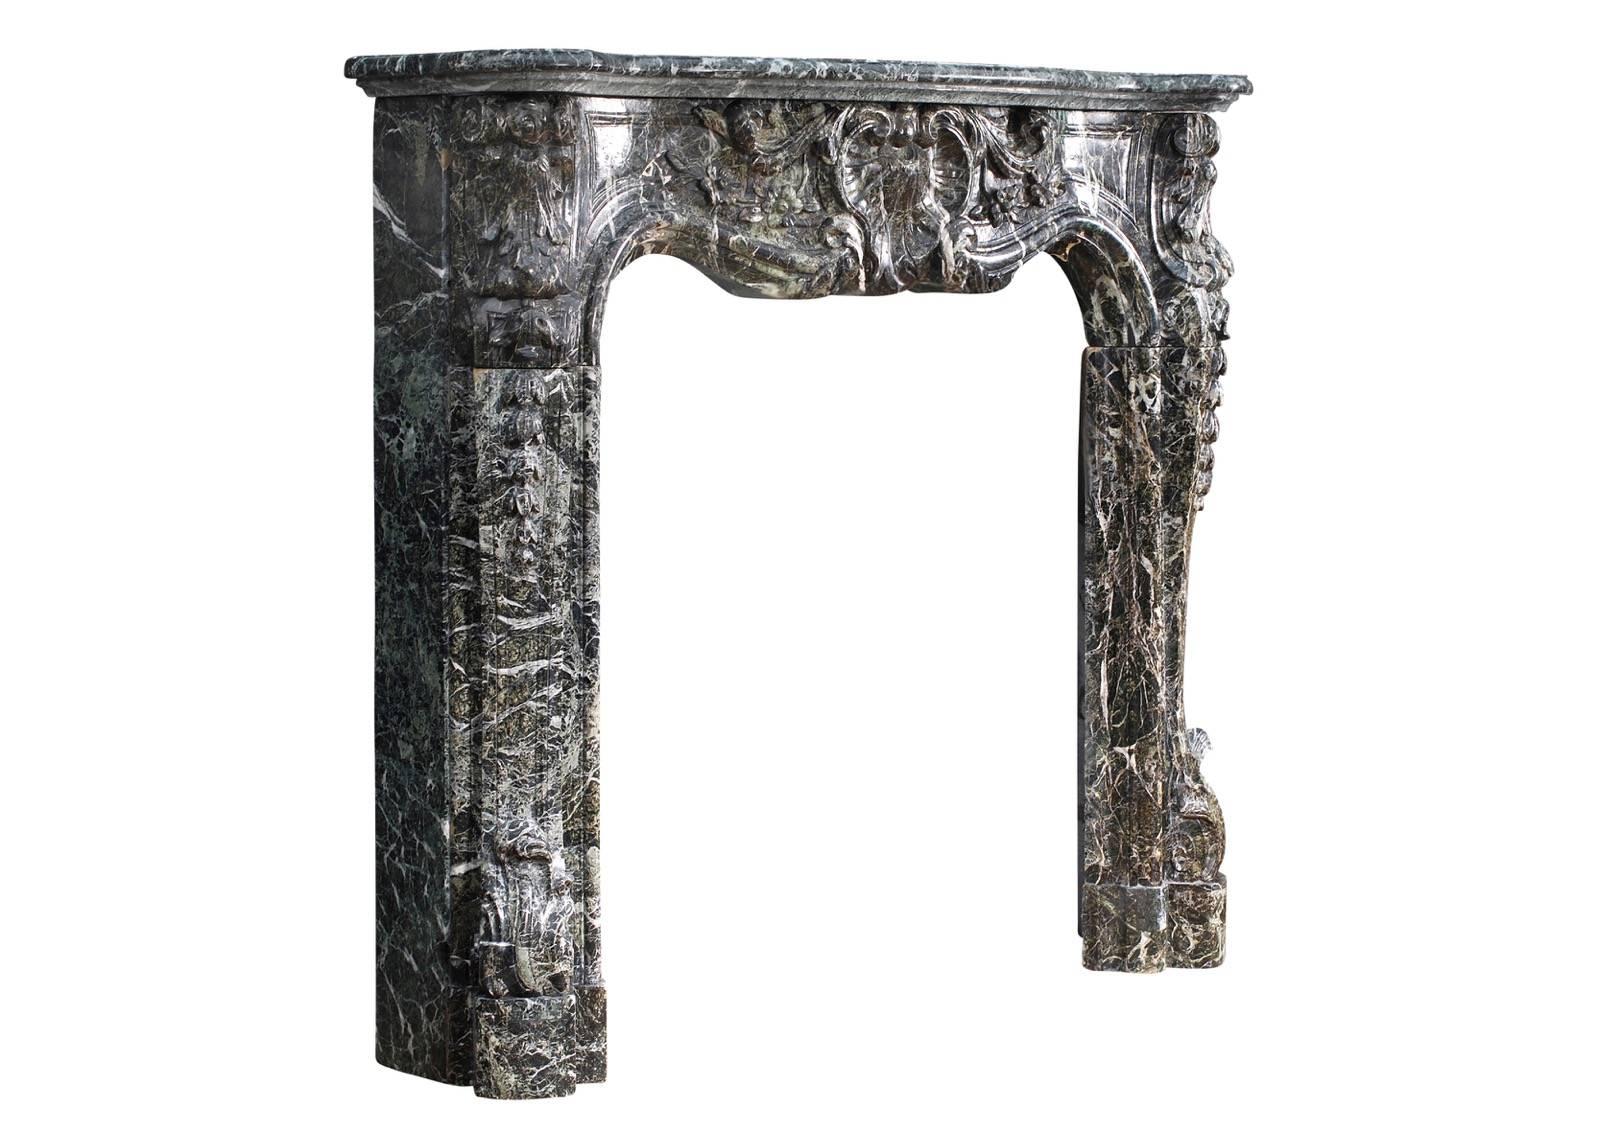 A 19th century French Louis XV style fireplace in Tinos green marble. The heavily carved panelled frieze with shells, flowers and foliage. The jambs with carved shells surmounted by belldrop flowers and stiff acanthus leaves to base. Shaped moulded